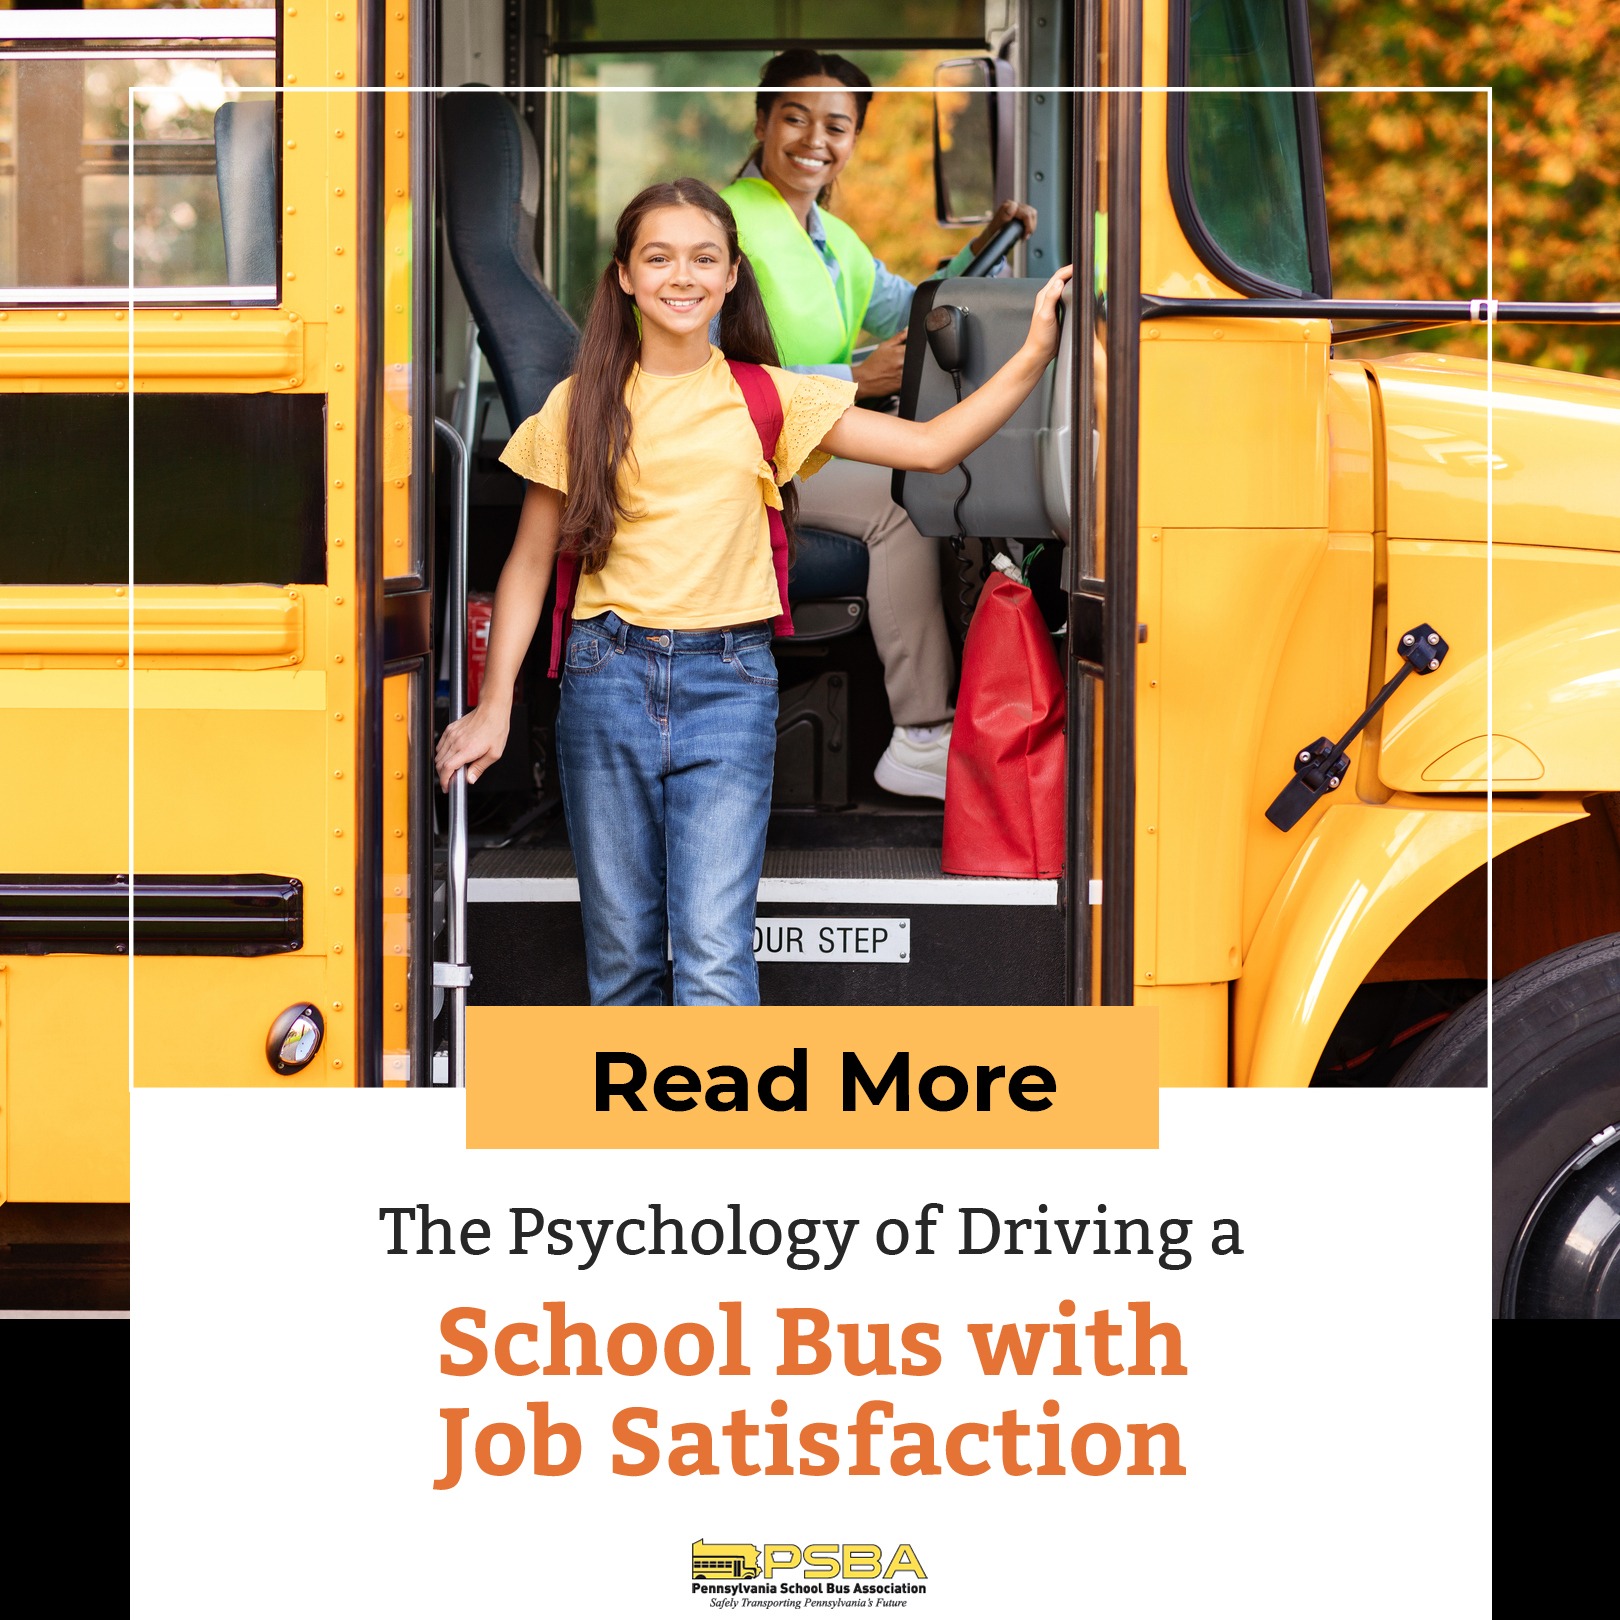 The Psychology of Driving a School Bus with Job Satisfaction